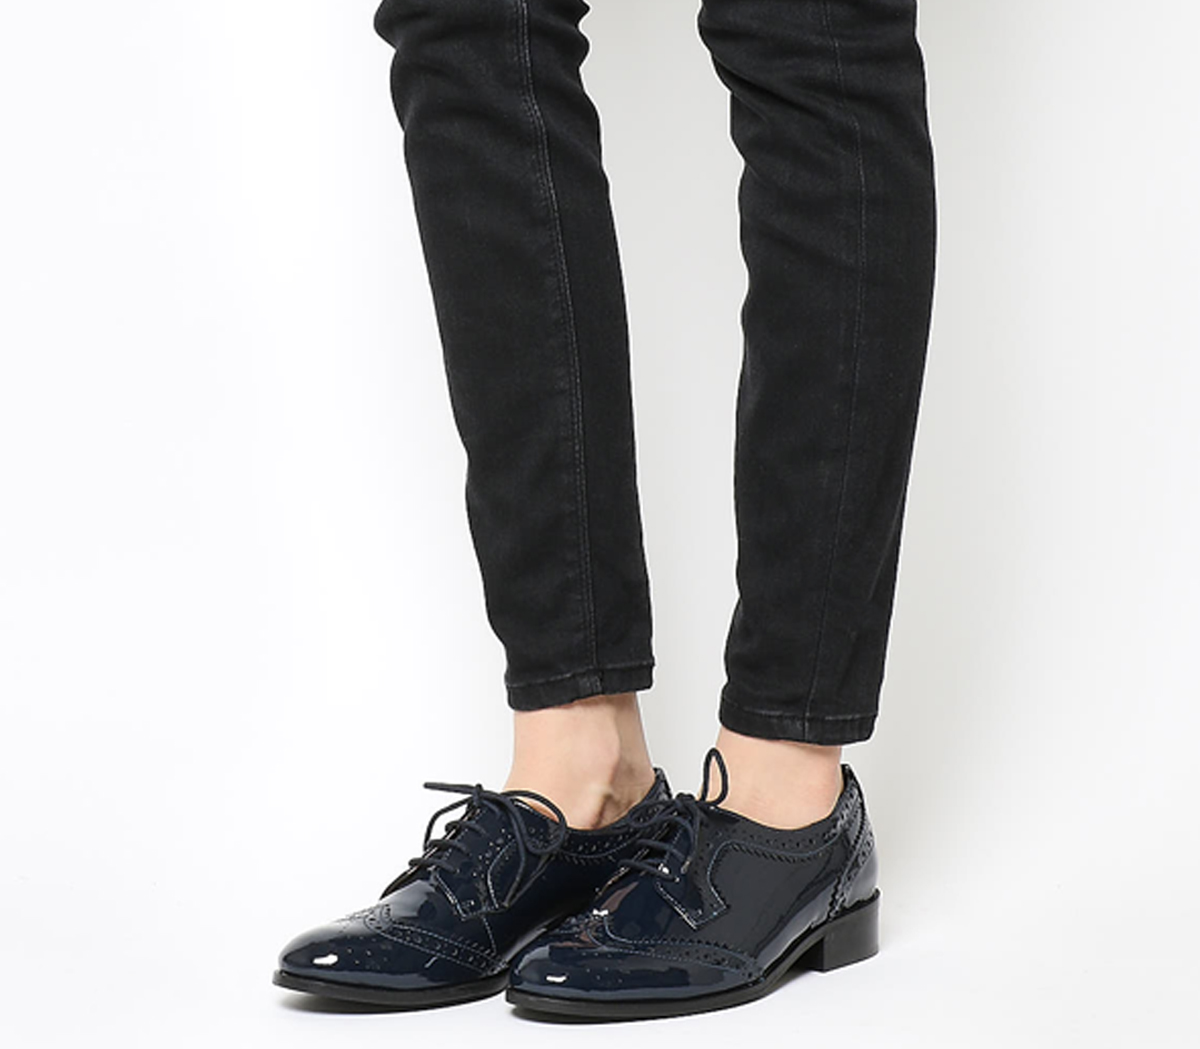 OFFICEPanther Brogue Lace UpNavy Patent